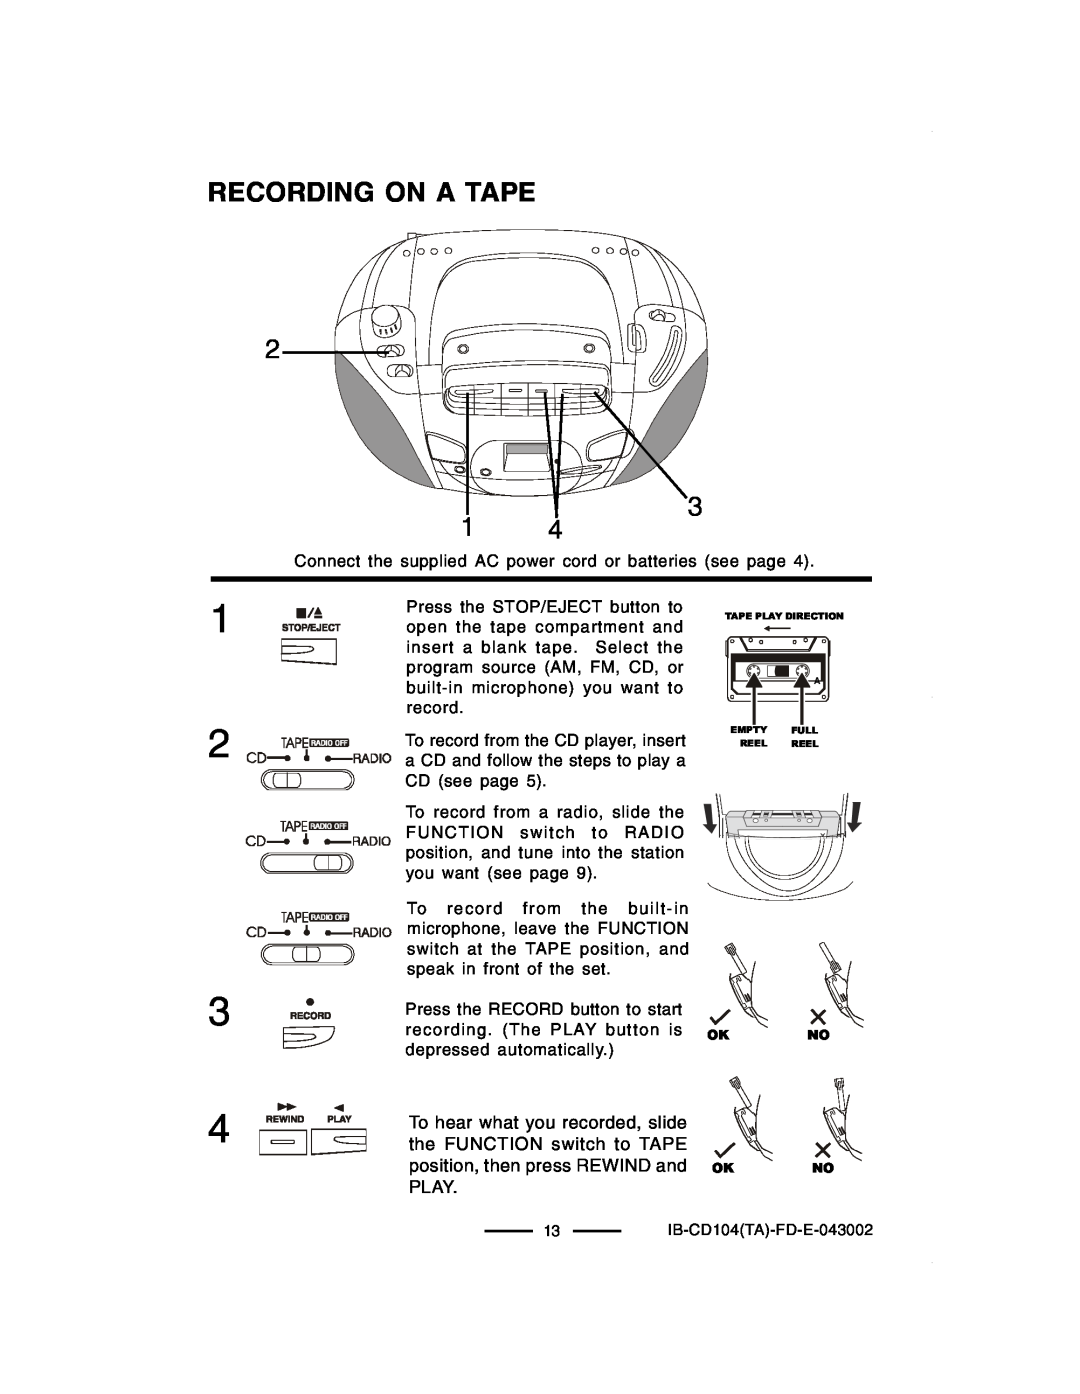 Lenoxx Electronics CD-104 manual Recording On A Tape, To hear what you recorded, slide, the FUNCTION switch to TAPE, Play 